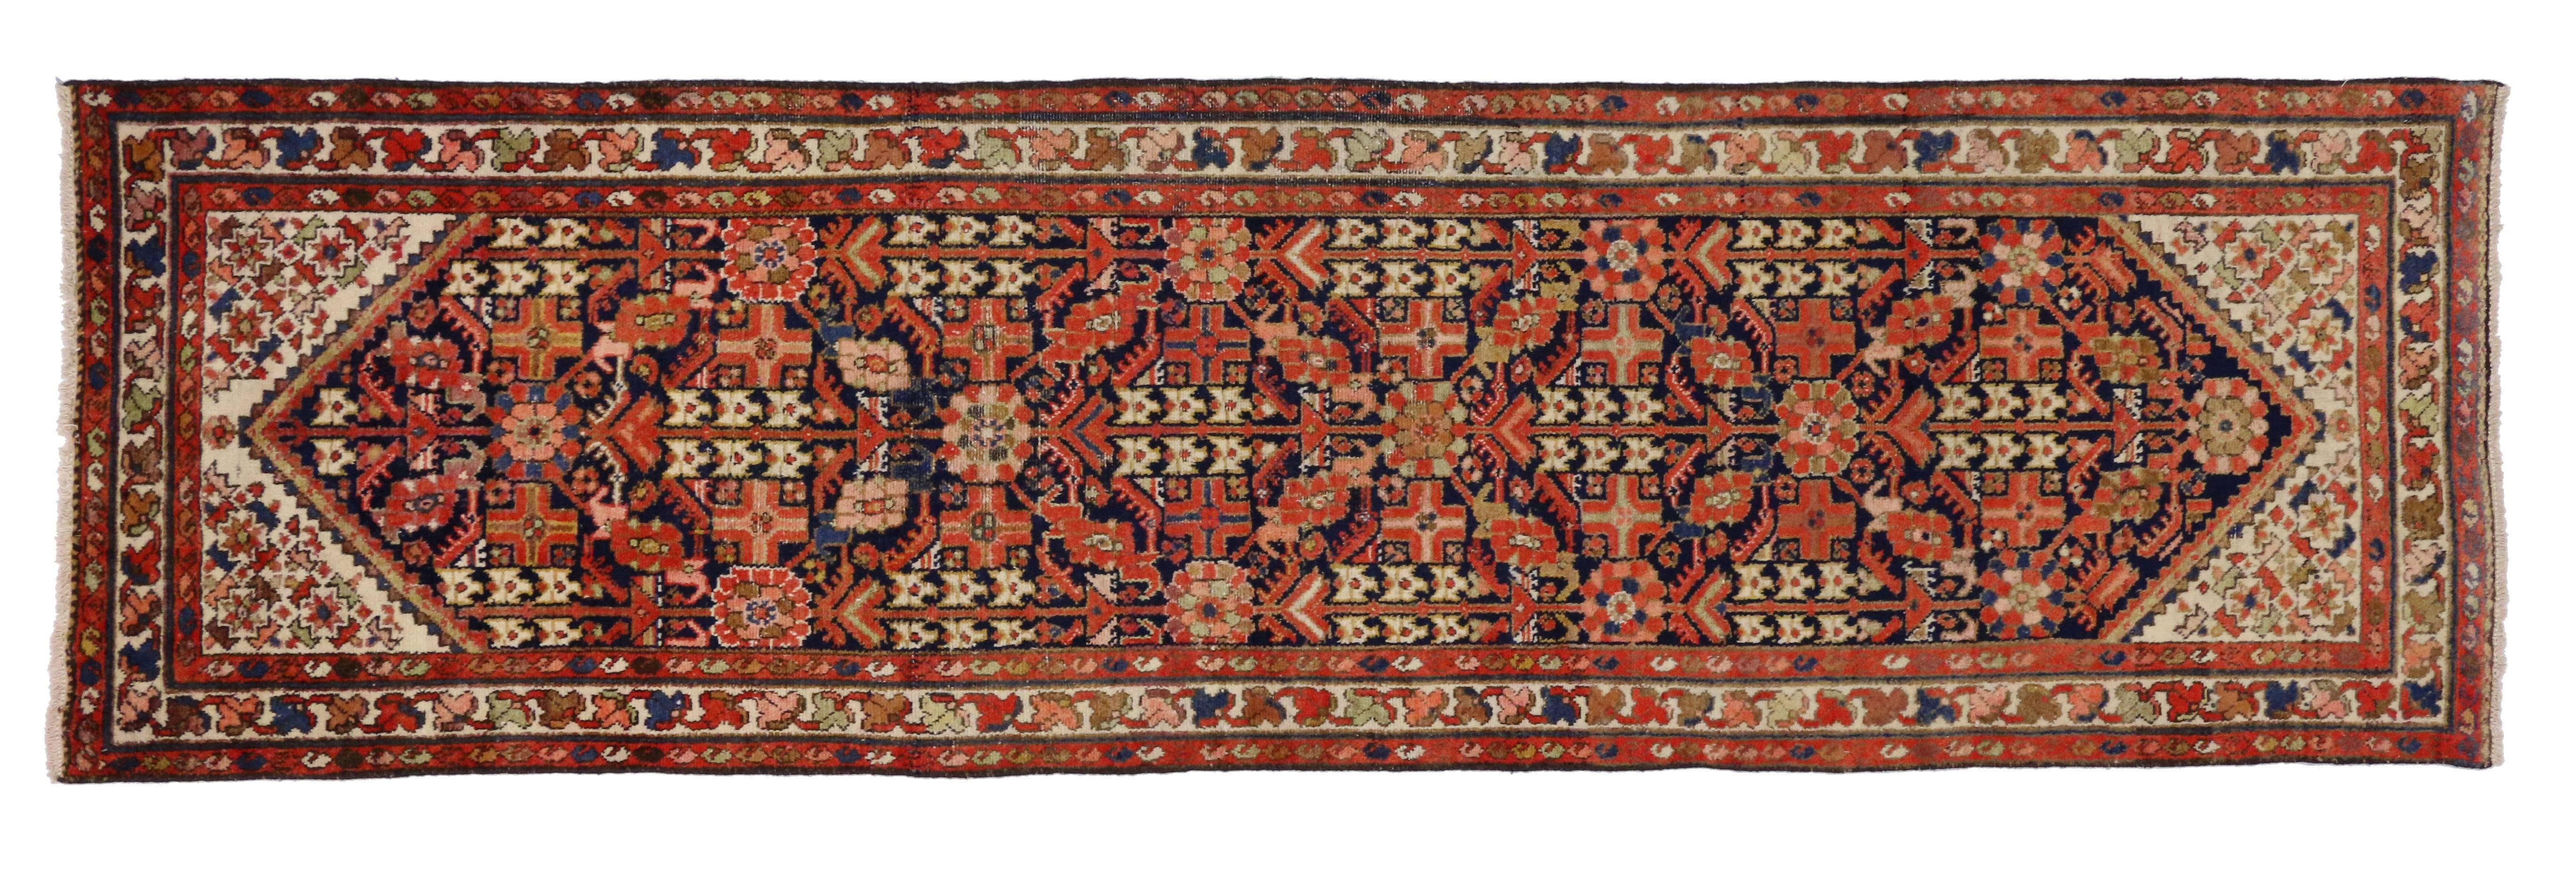 Hand-Knotted Vintage Persian Malayer Runner with Guli Hinnai Flower, Modern Hallway Runner For Sale